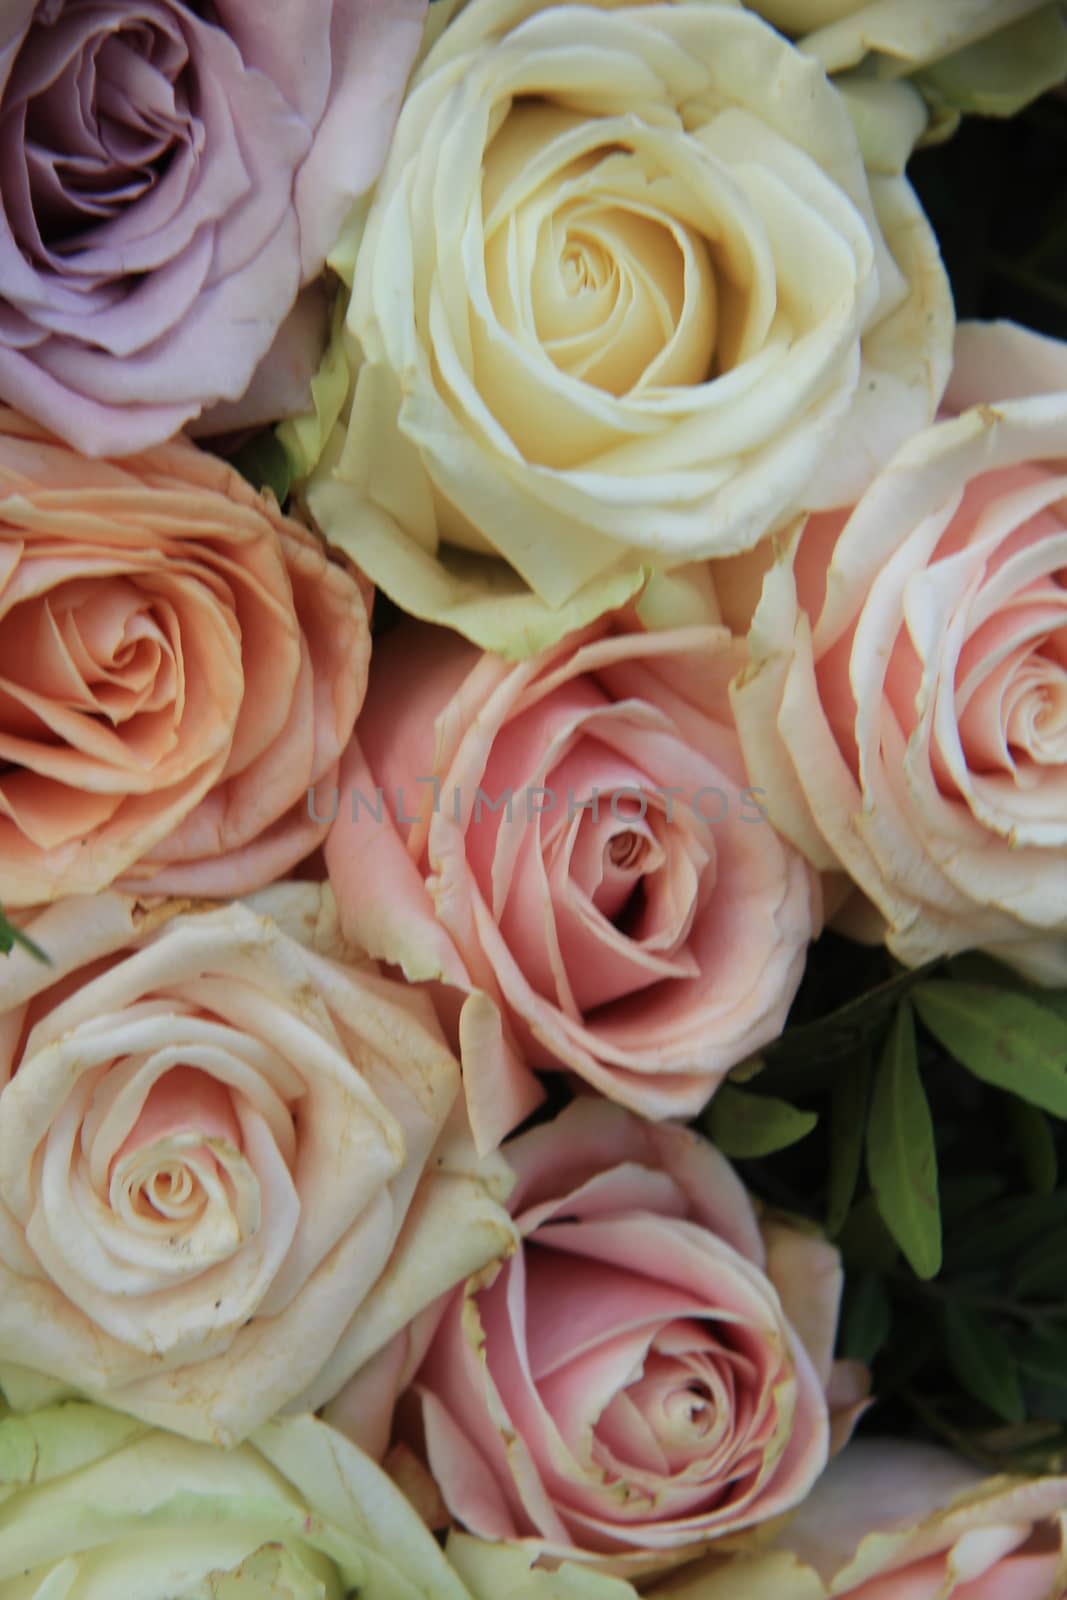 Pastel roses in various colors in a mixed wedding arrangement